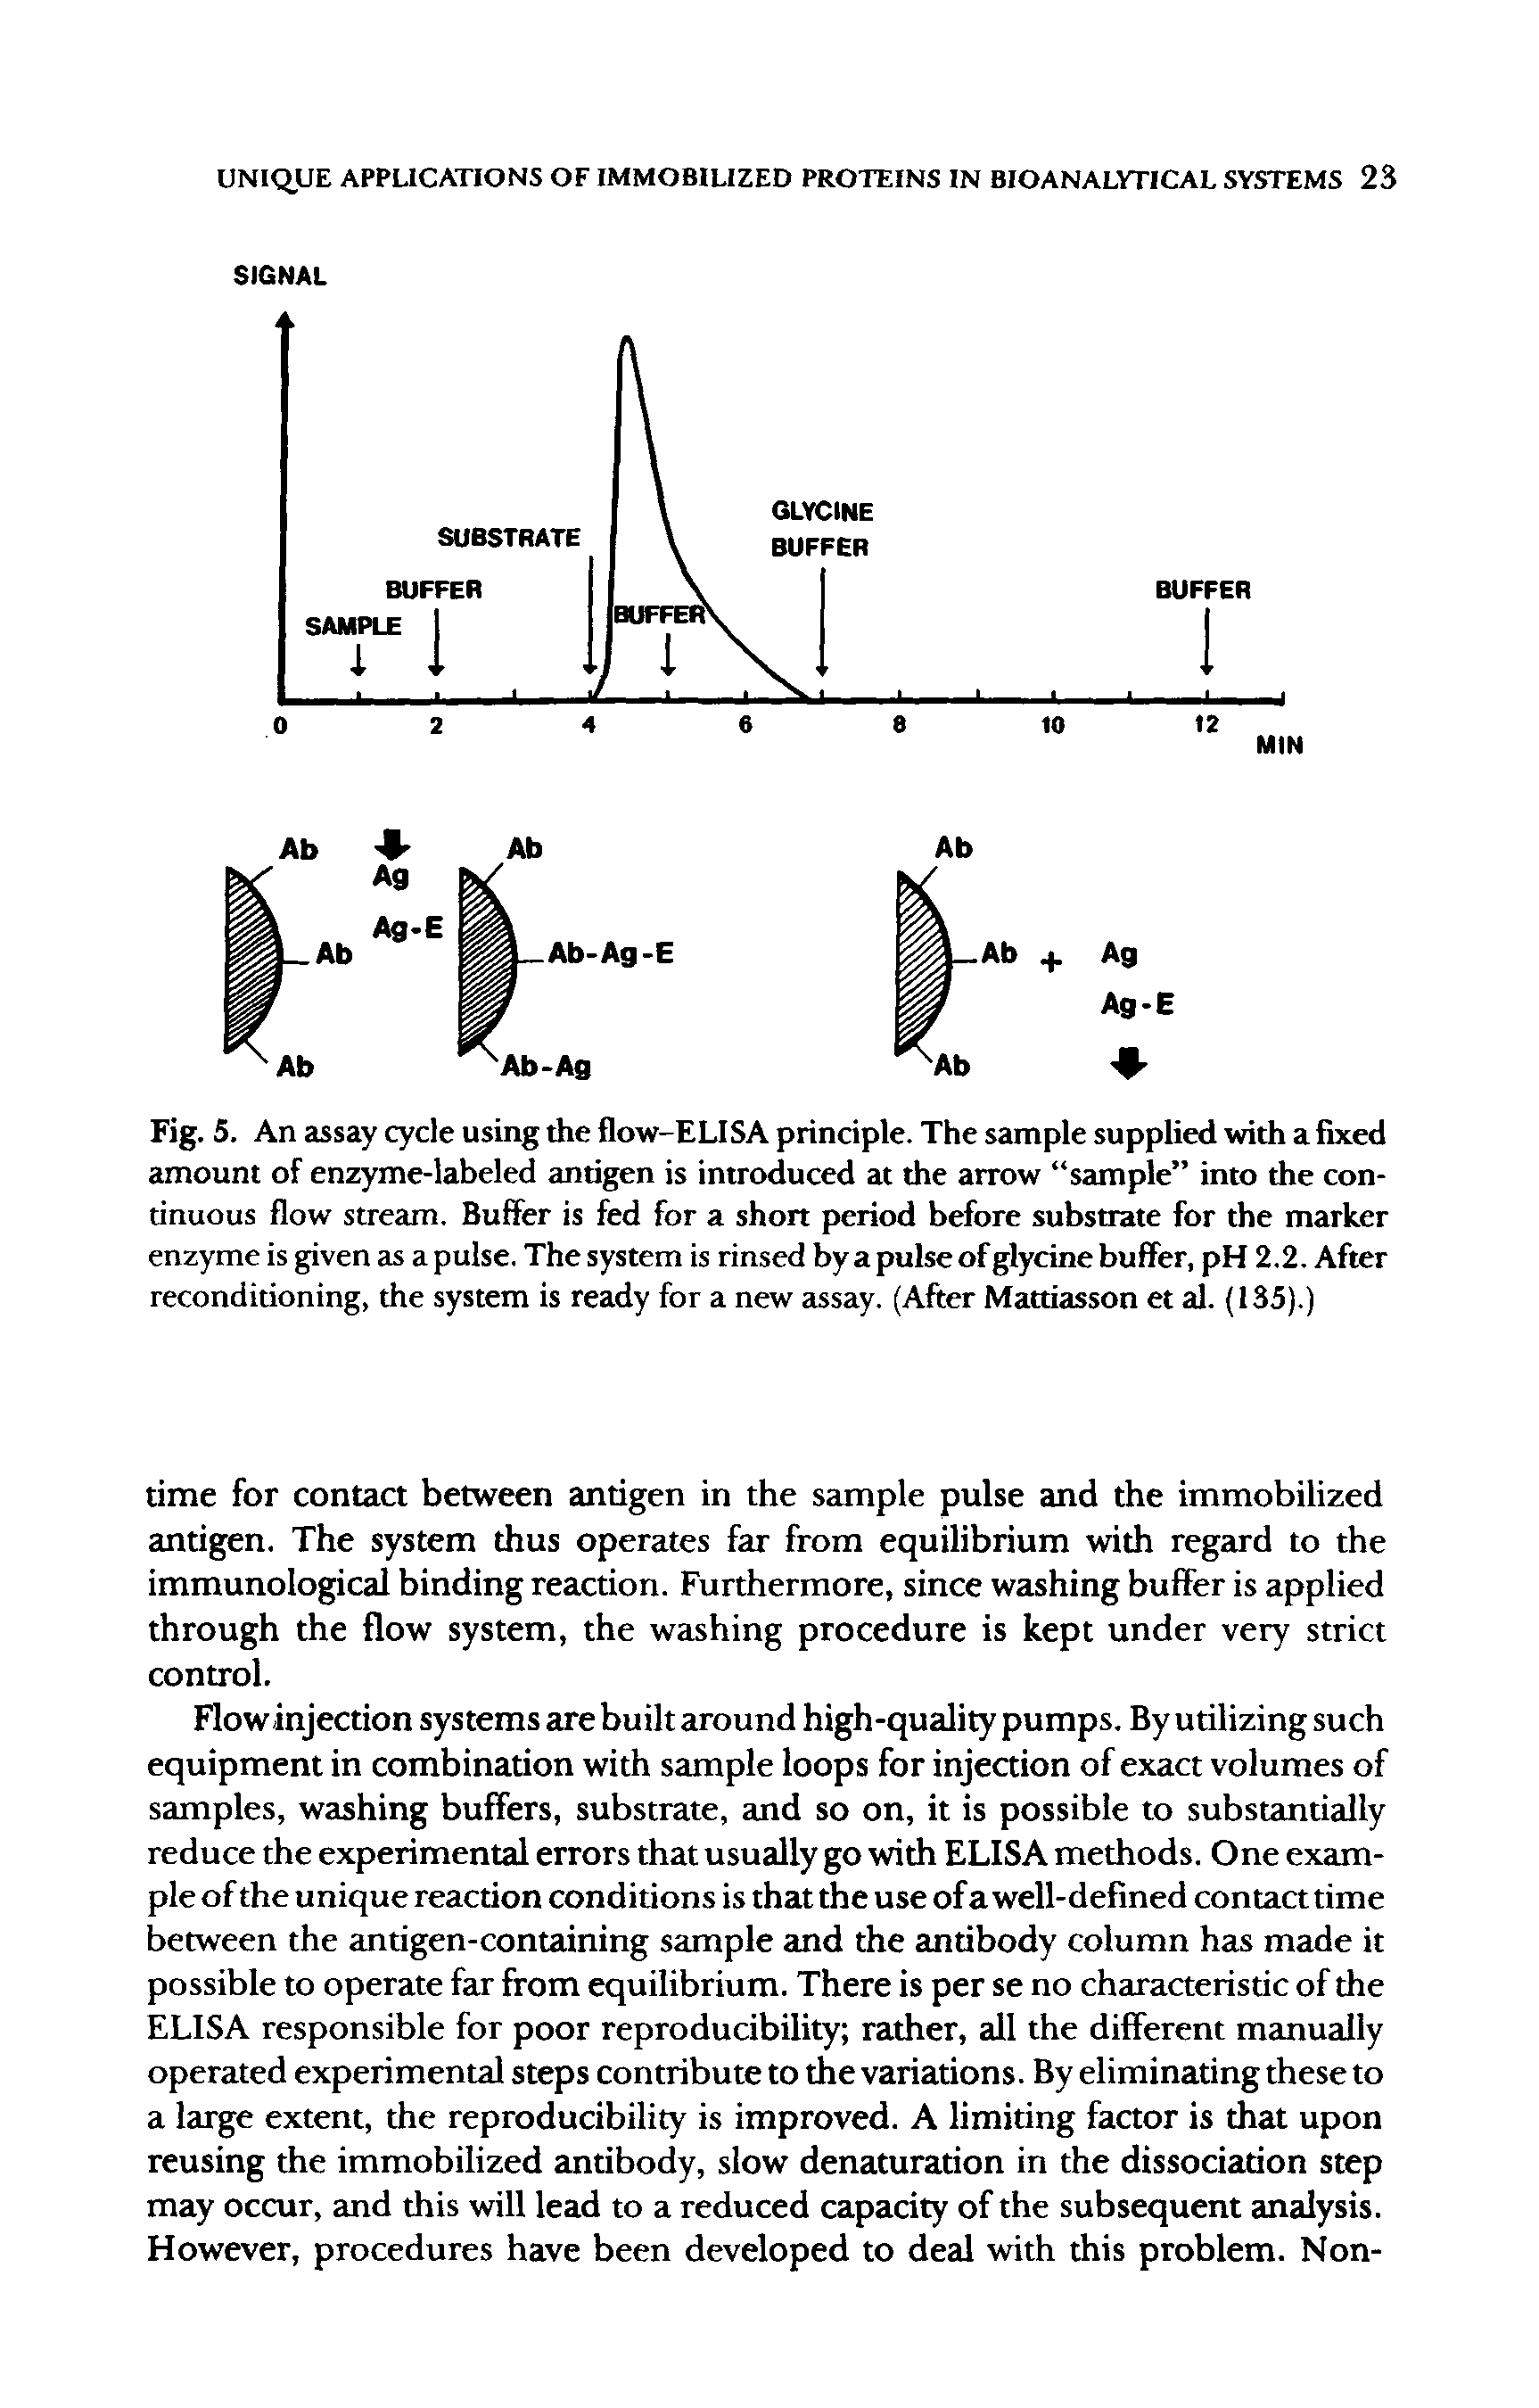 Fig. 5. An assay cycle using the flow-ELISA principle. The sample supplied with a fixed amount of enzyme-labeled antigen is introduced at the arrow sample into the continuous flow stream. Buffer is fed for a shon period before substrate for the marker enzyme is given as a pulse. The system is rinsed by a pulse of glycine buffer, pH 2.2. After reconditioning, the system is ready for a new assay. (After Mattiasson et al. (135).)...